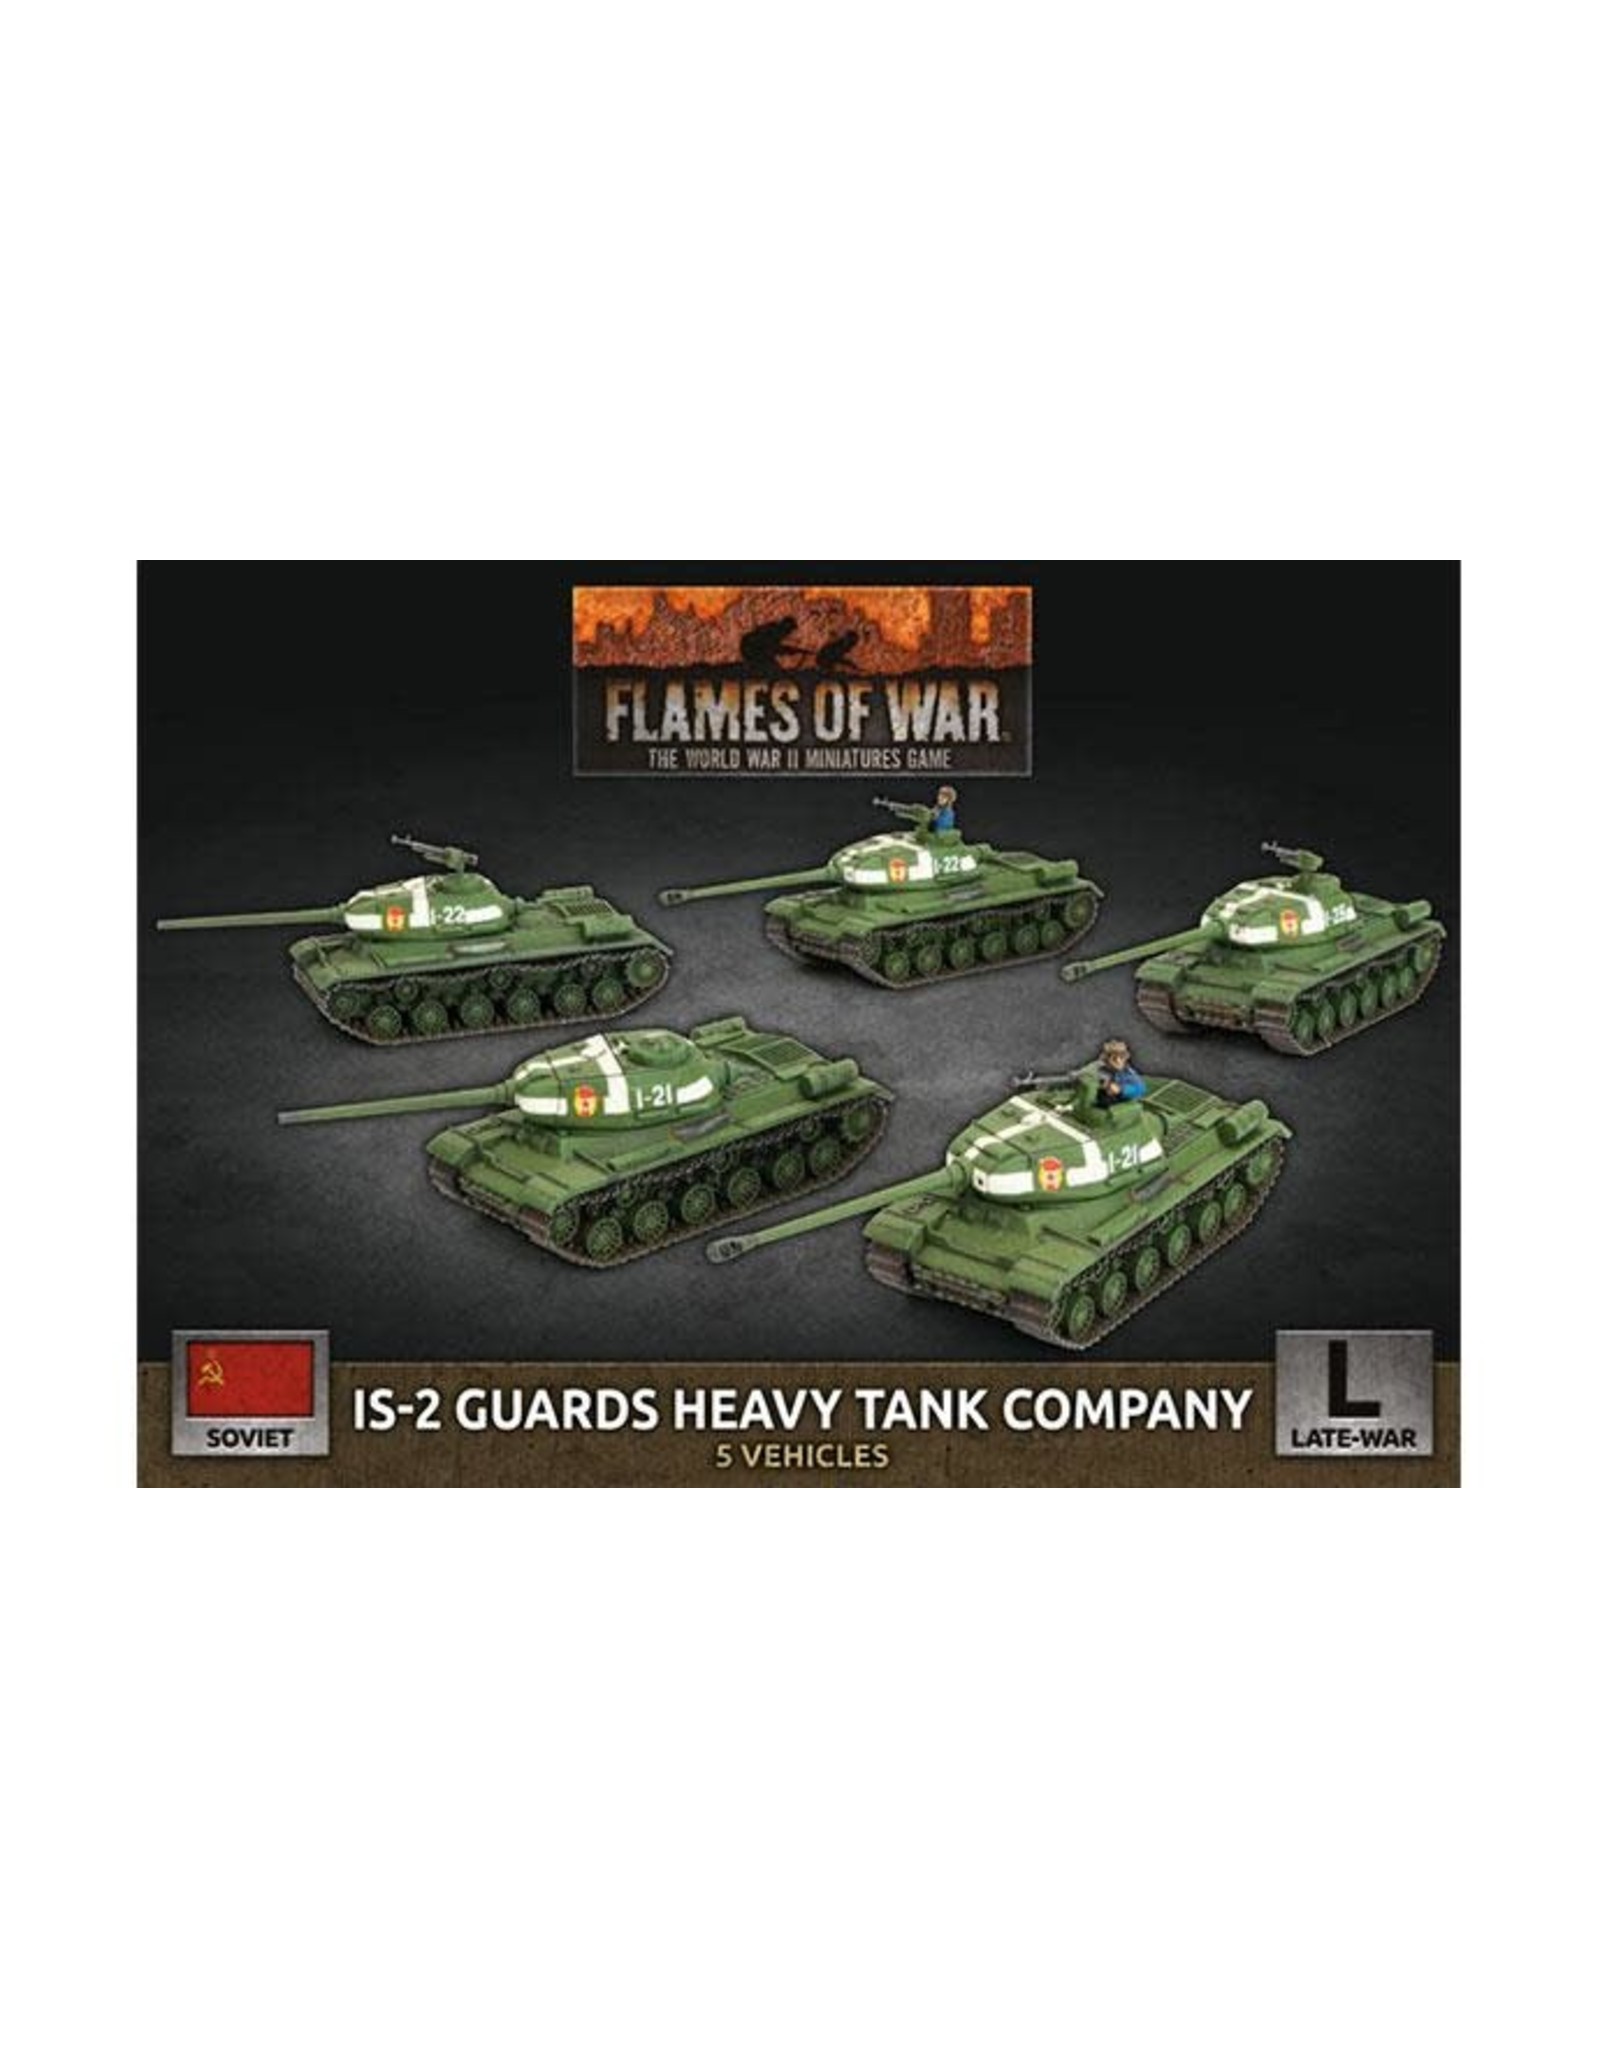 Battlefront Miniatures Flames of War IS-2 Guards Heavy Tank Company